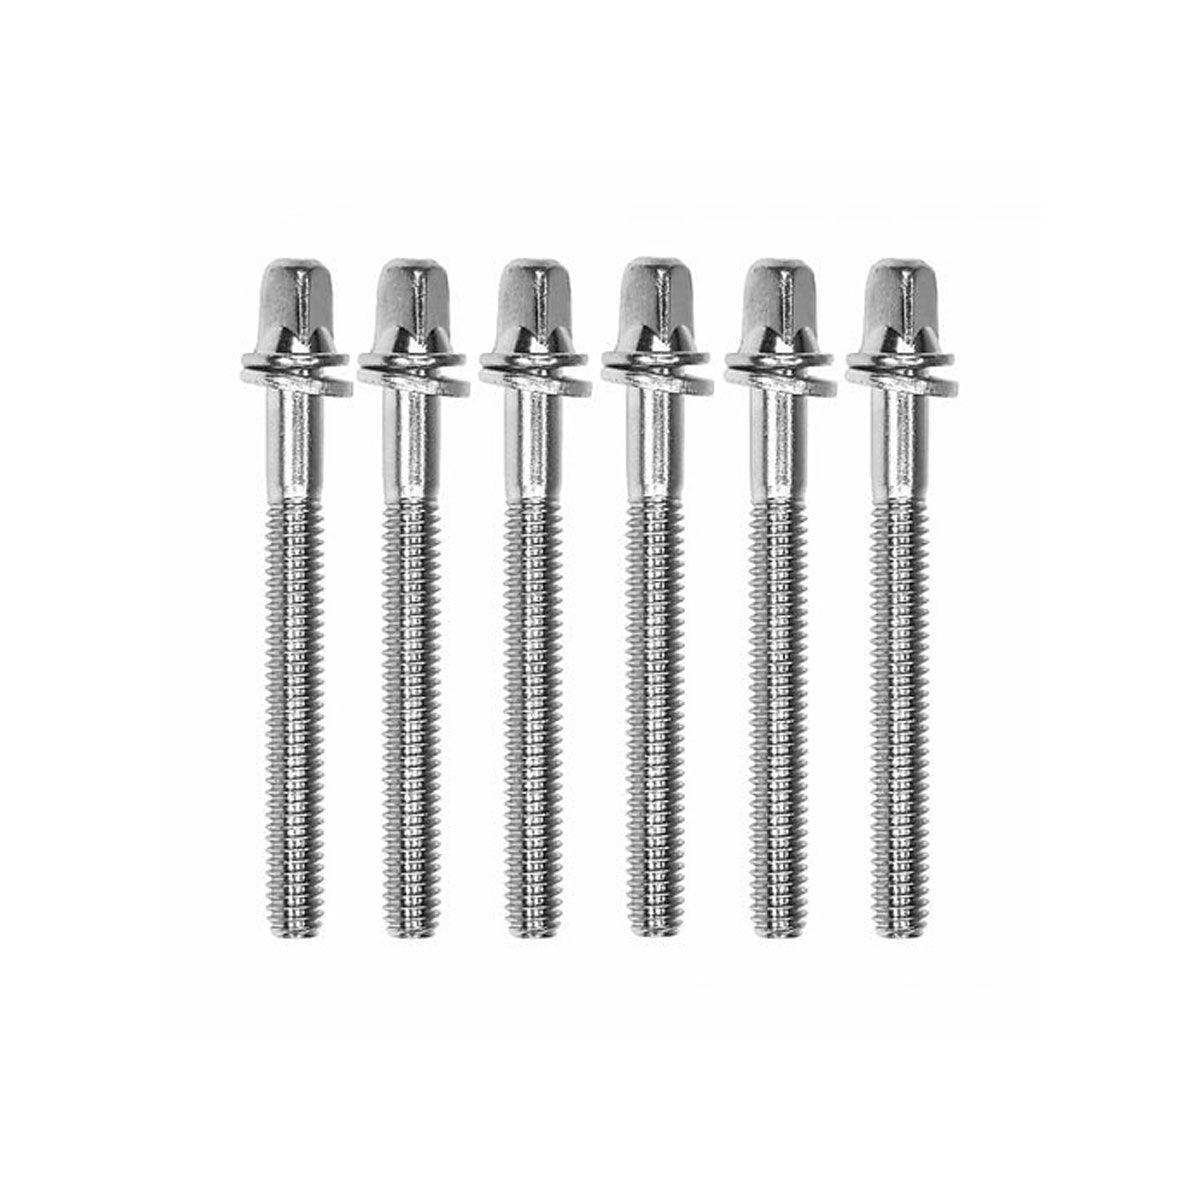 Pearl M5.8 x 67mm T-063L/6 Tension Rods - 6 Pack